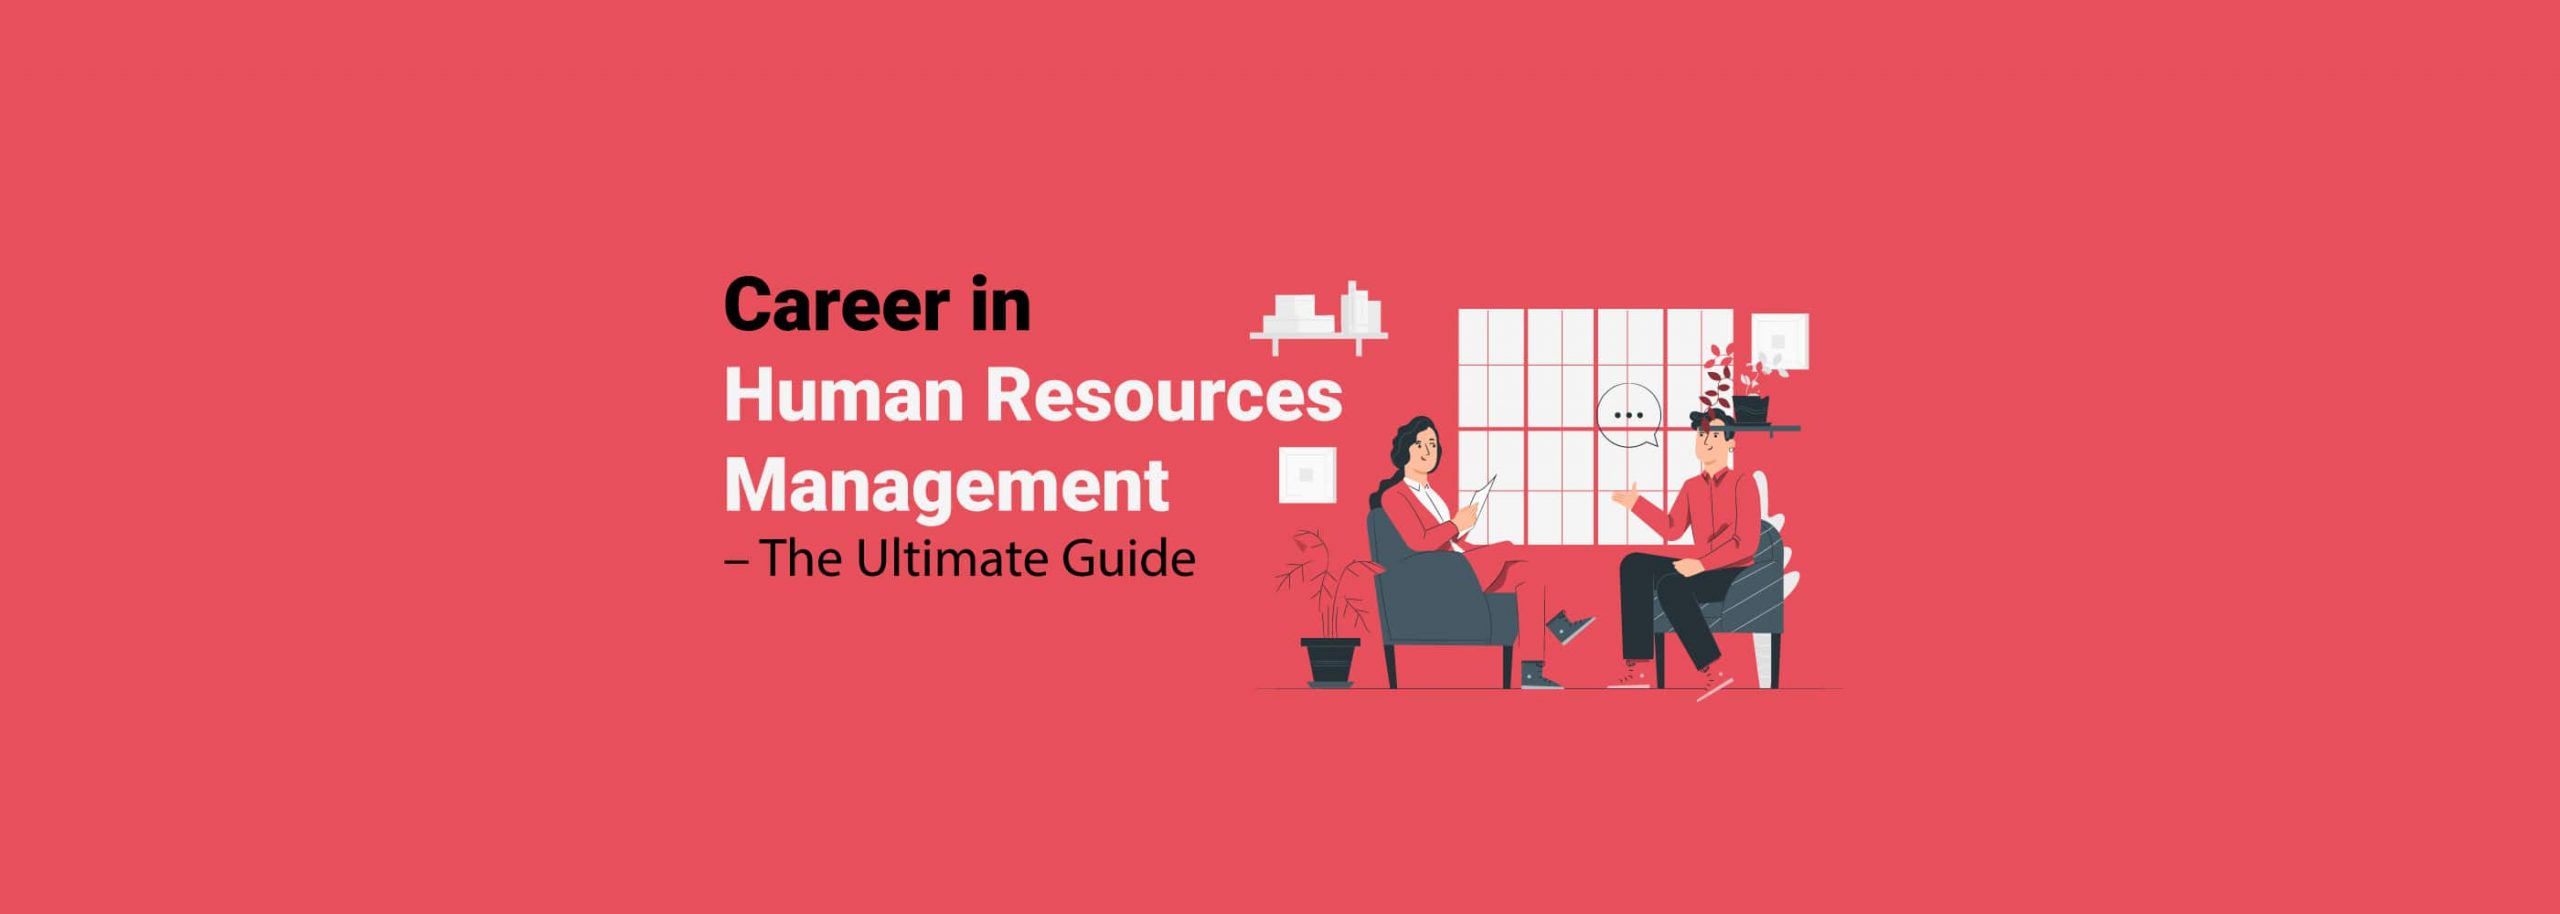 Career in Human Resources Management - Best Guide 21st Century - Data Trained Blogs